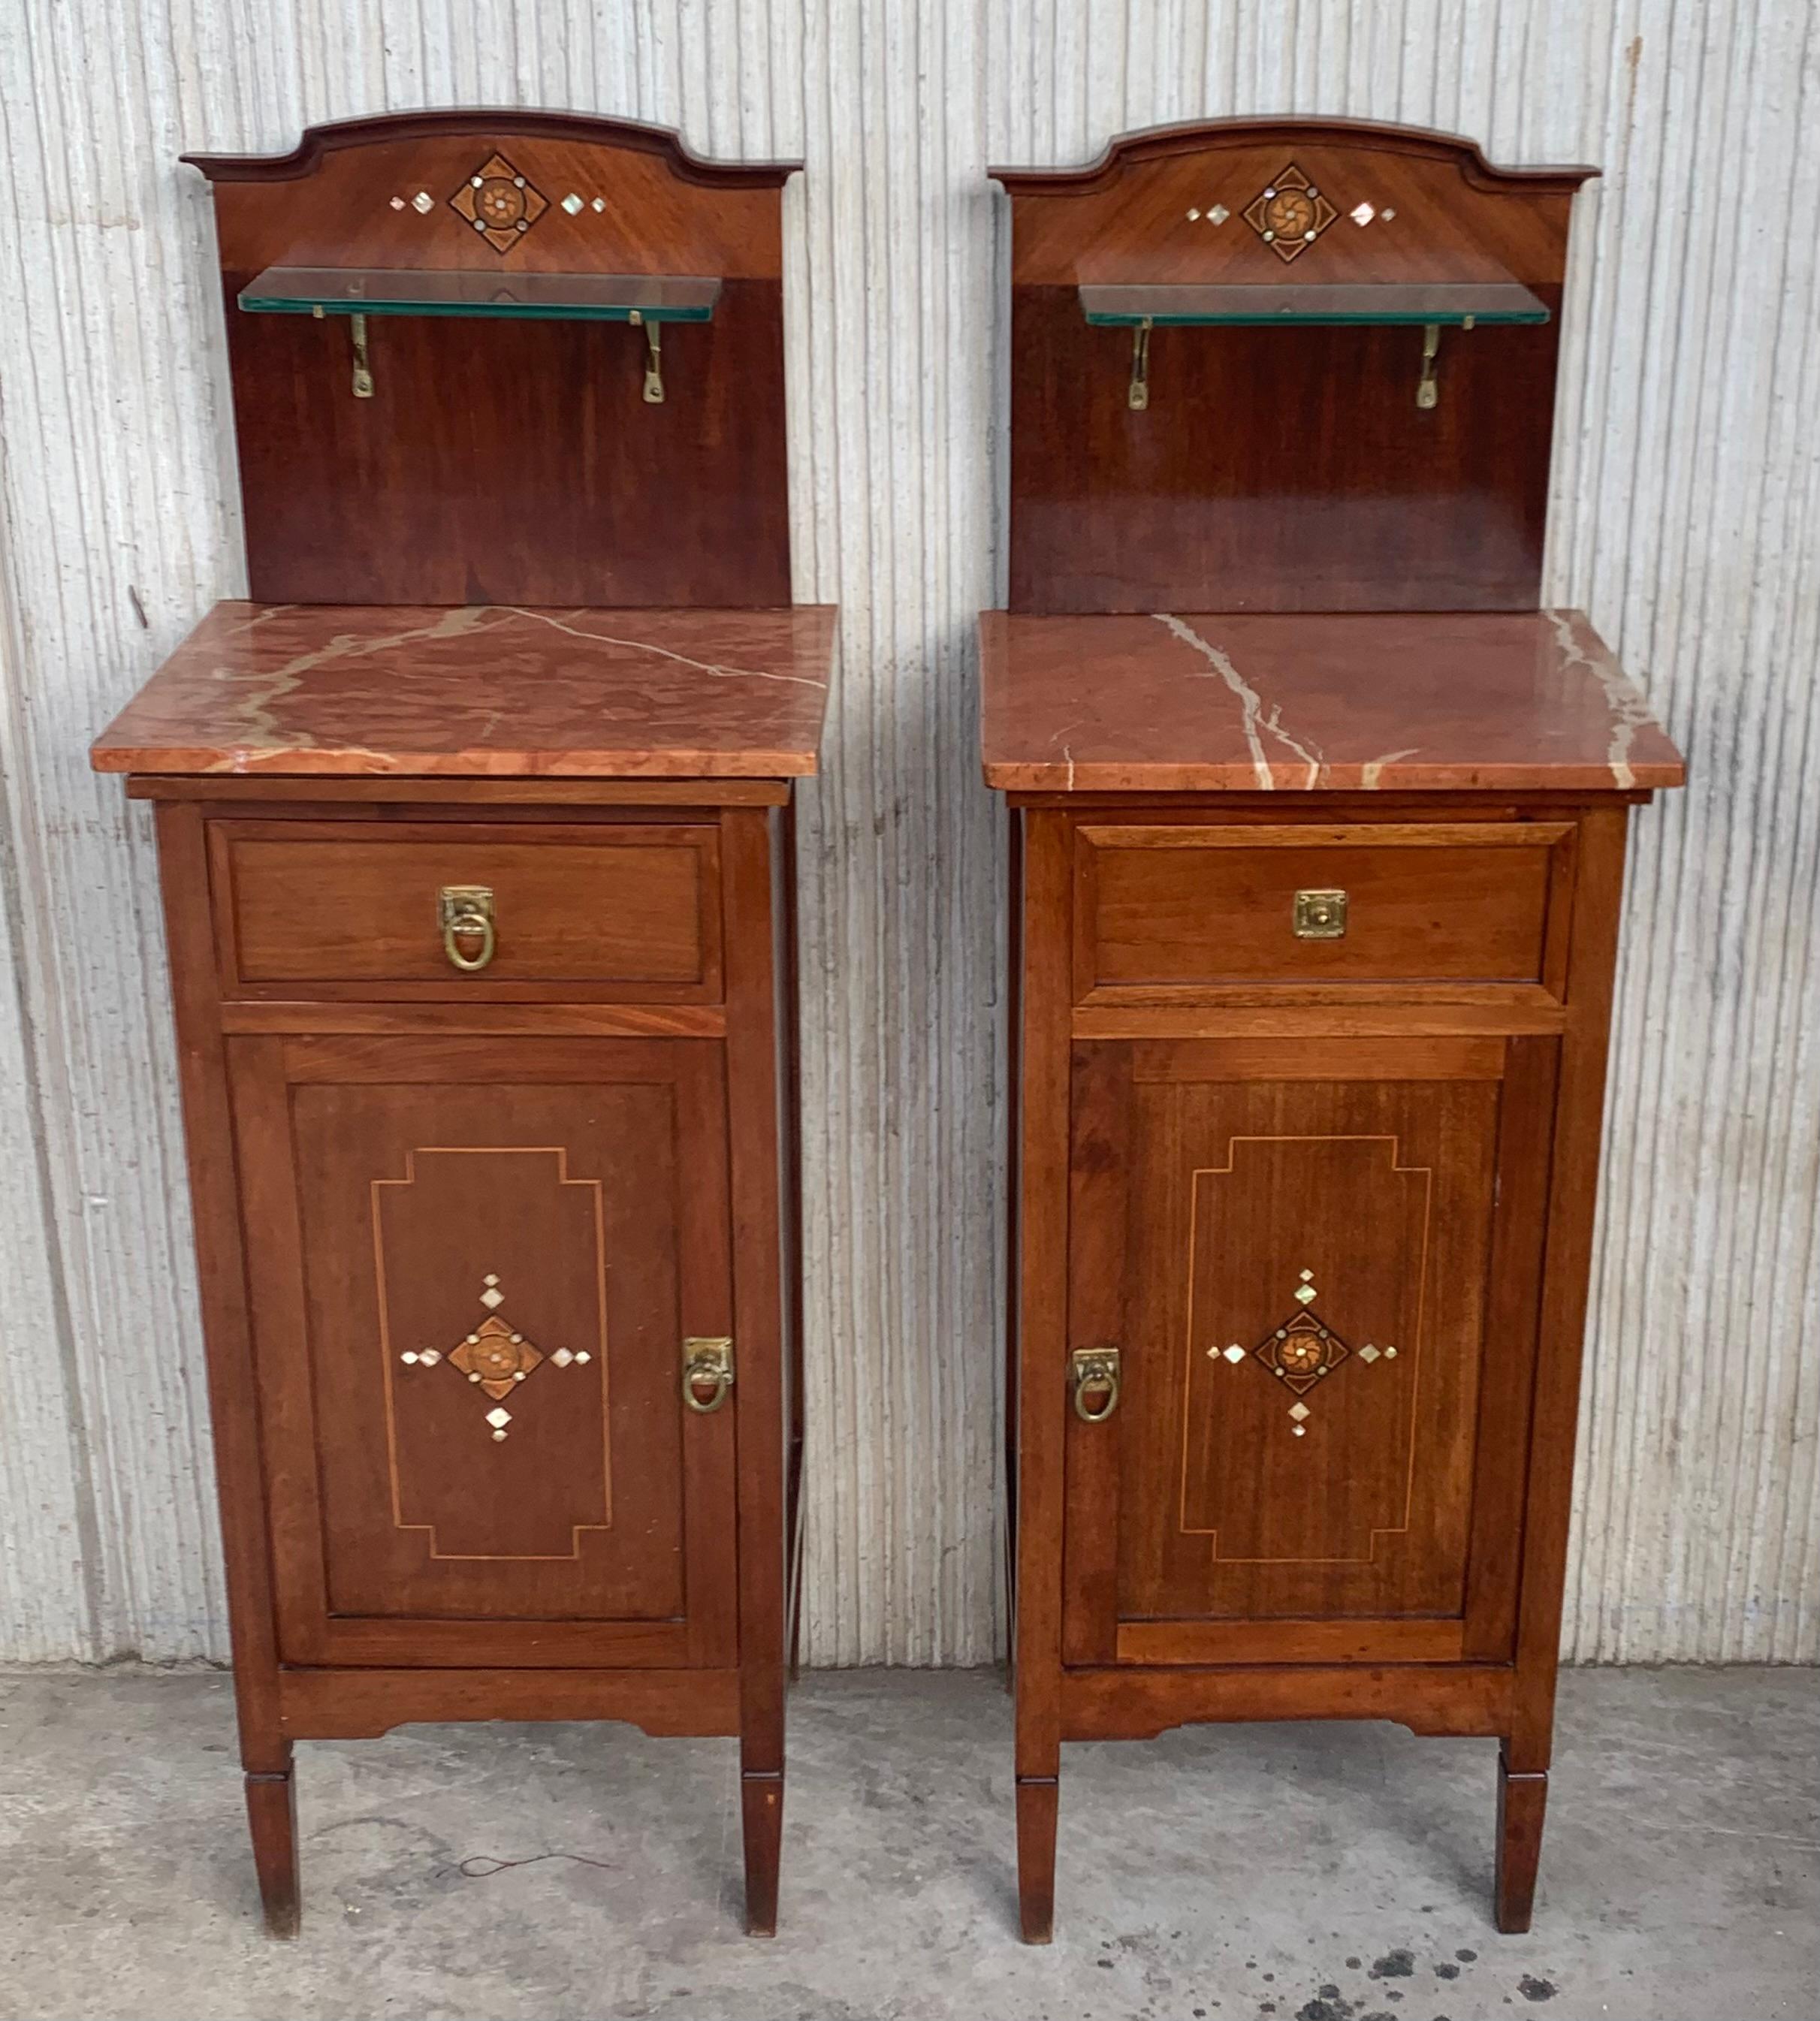 Late 19th century Art Nouveau pair of nightstands with marquetry inlays in walnut, bronze handles, restored and polished to wax.
Measures: Height to the glass shelve 42.12in
Height to the table 32.48in.